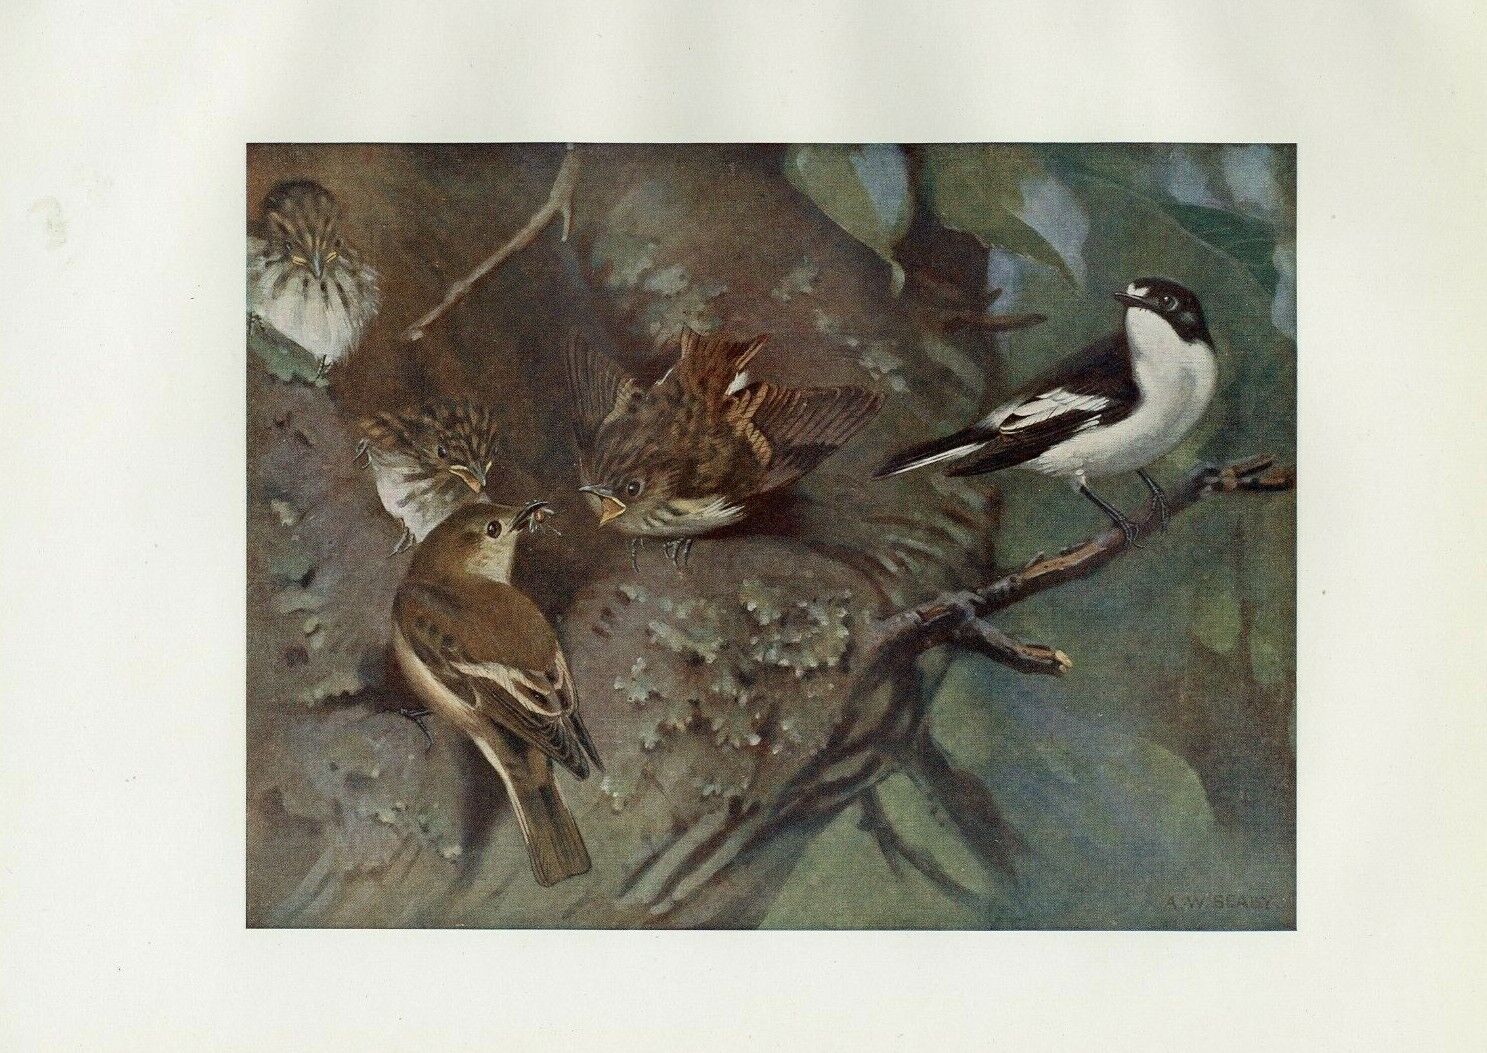 PIED FLYCATCHER 1913 ANTIQUE BIRD COLOUR ART PRINT by A.W. SEABY GREAT GIFT